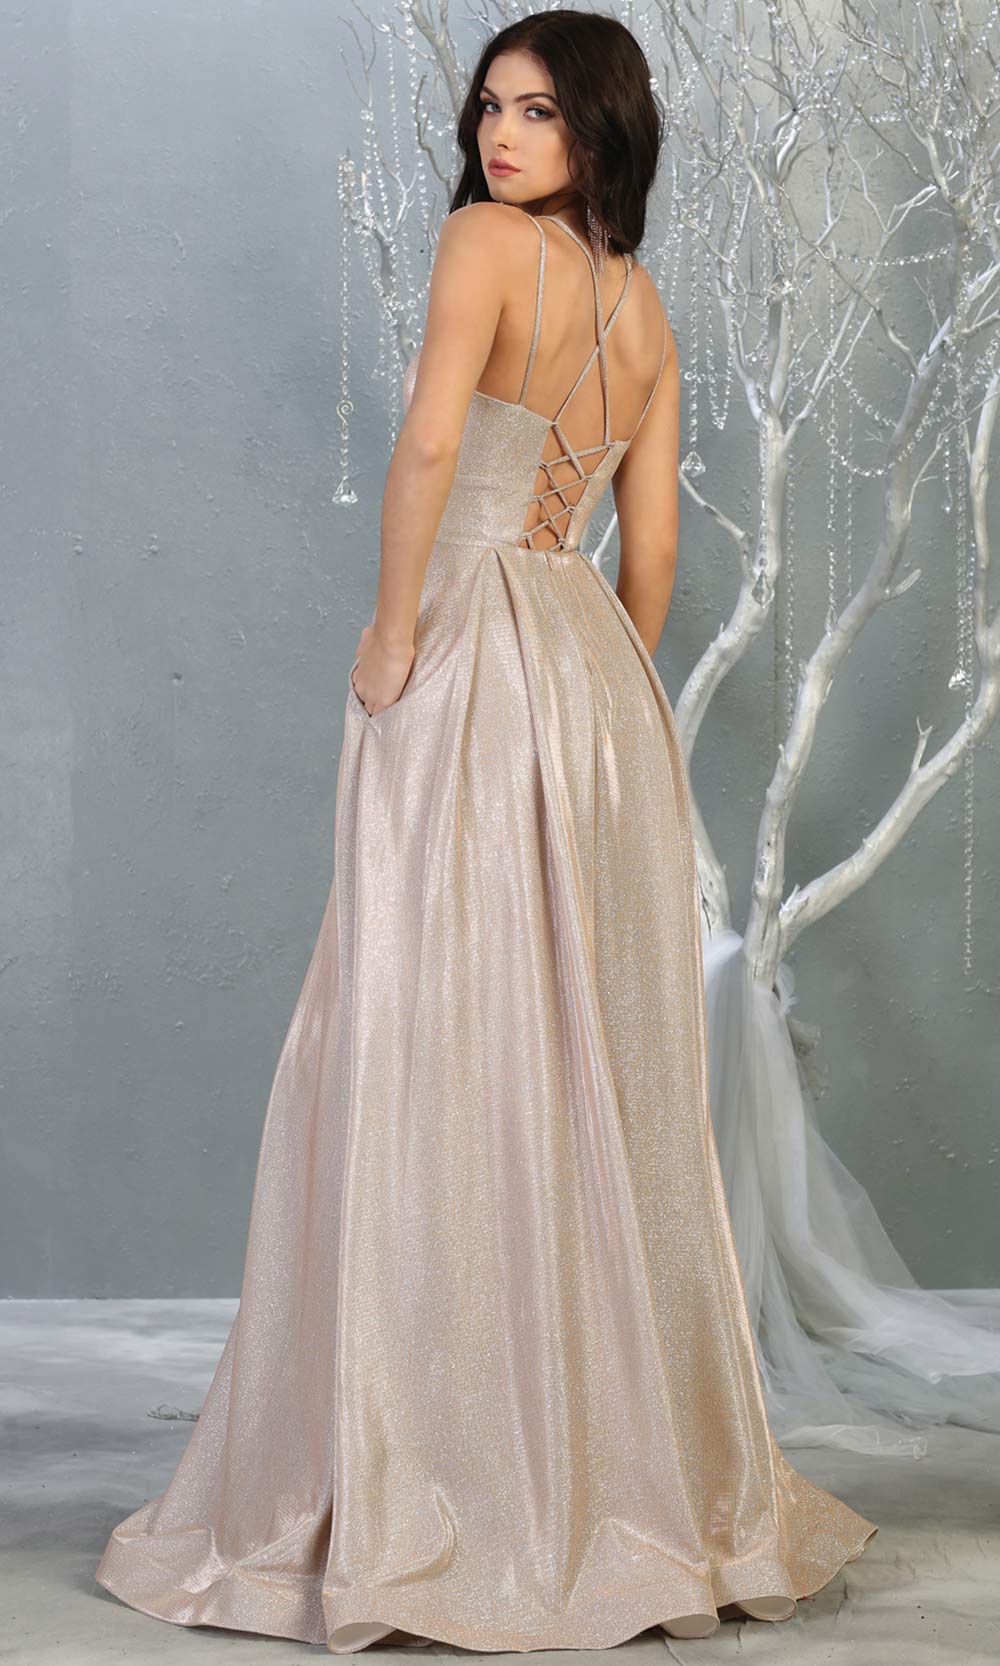 Mayqueen MQ1760 long rose gold metallic evening flowy dress w/straps. Full length rose gold gown is perfect for enagagement/e-shoot dress, wedding guest dress, indowestern gown, formal evening party dress, prom, wedding guest. Plus sizes avail-b.jpg